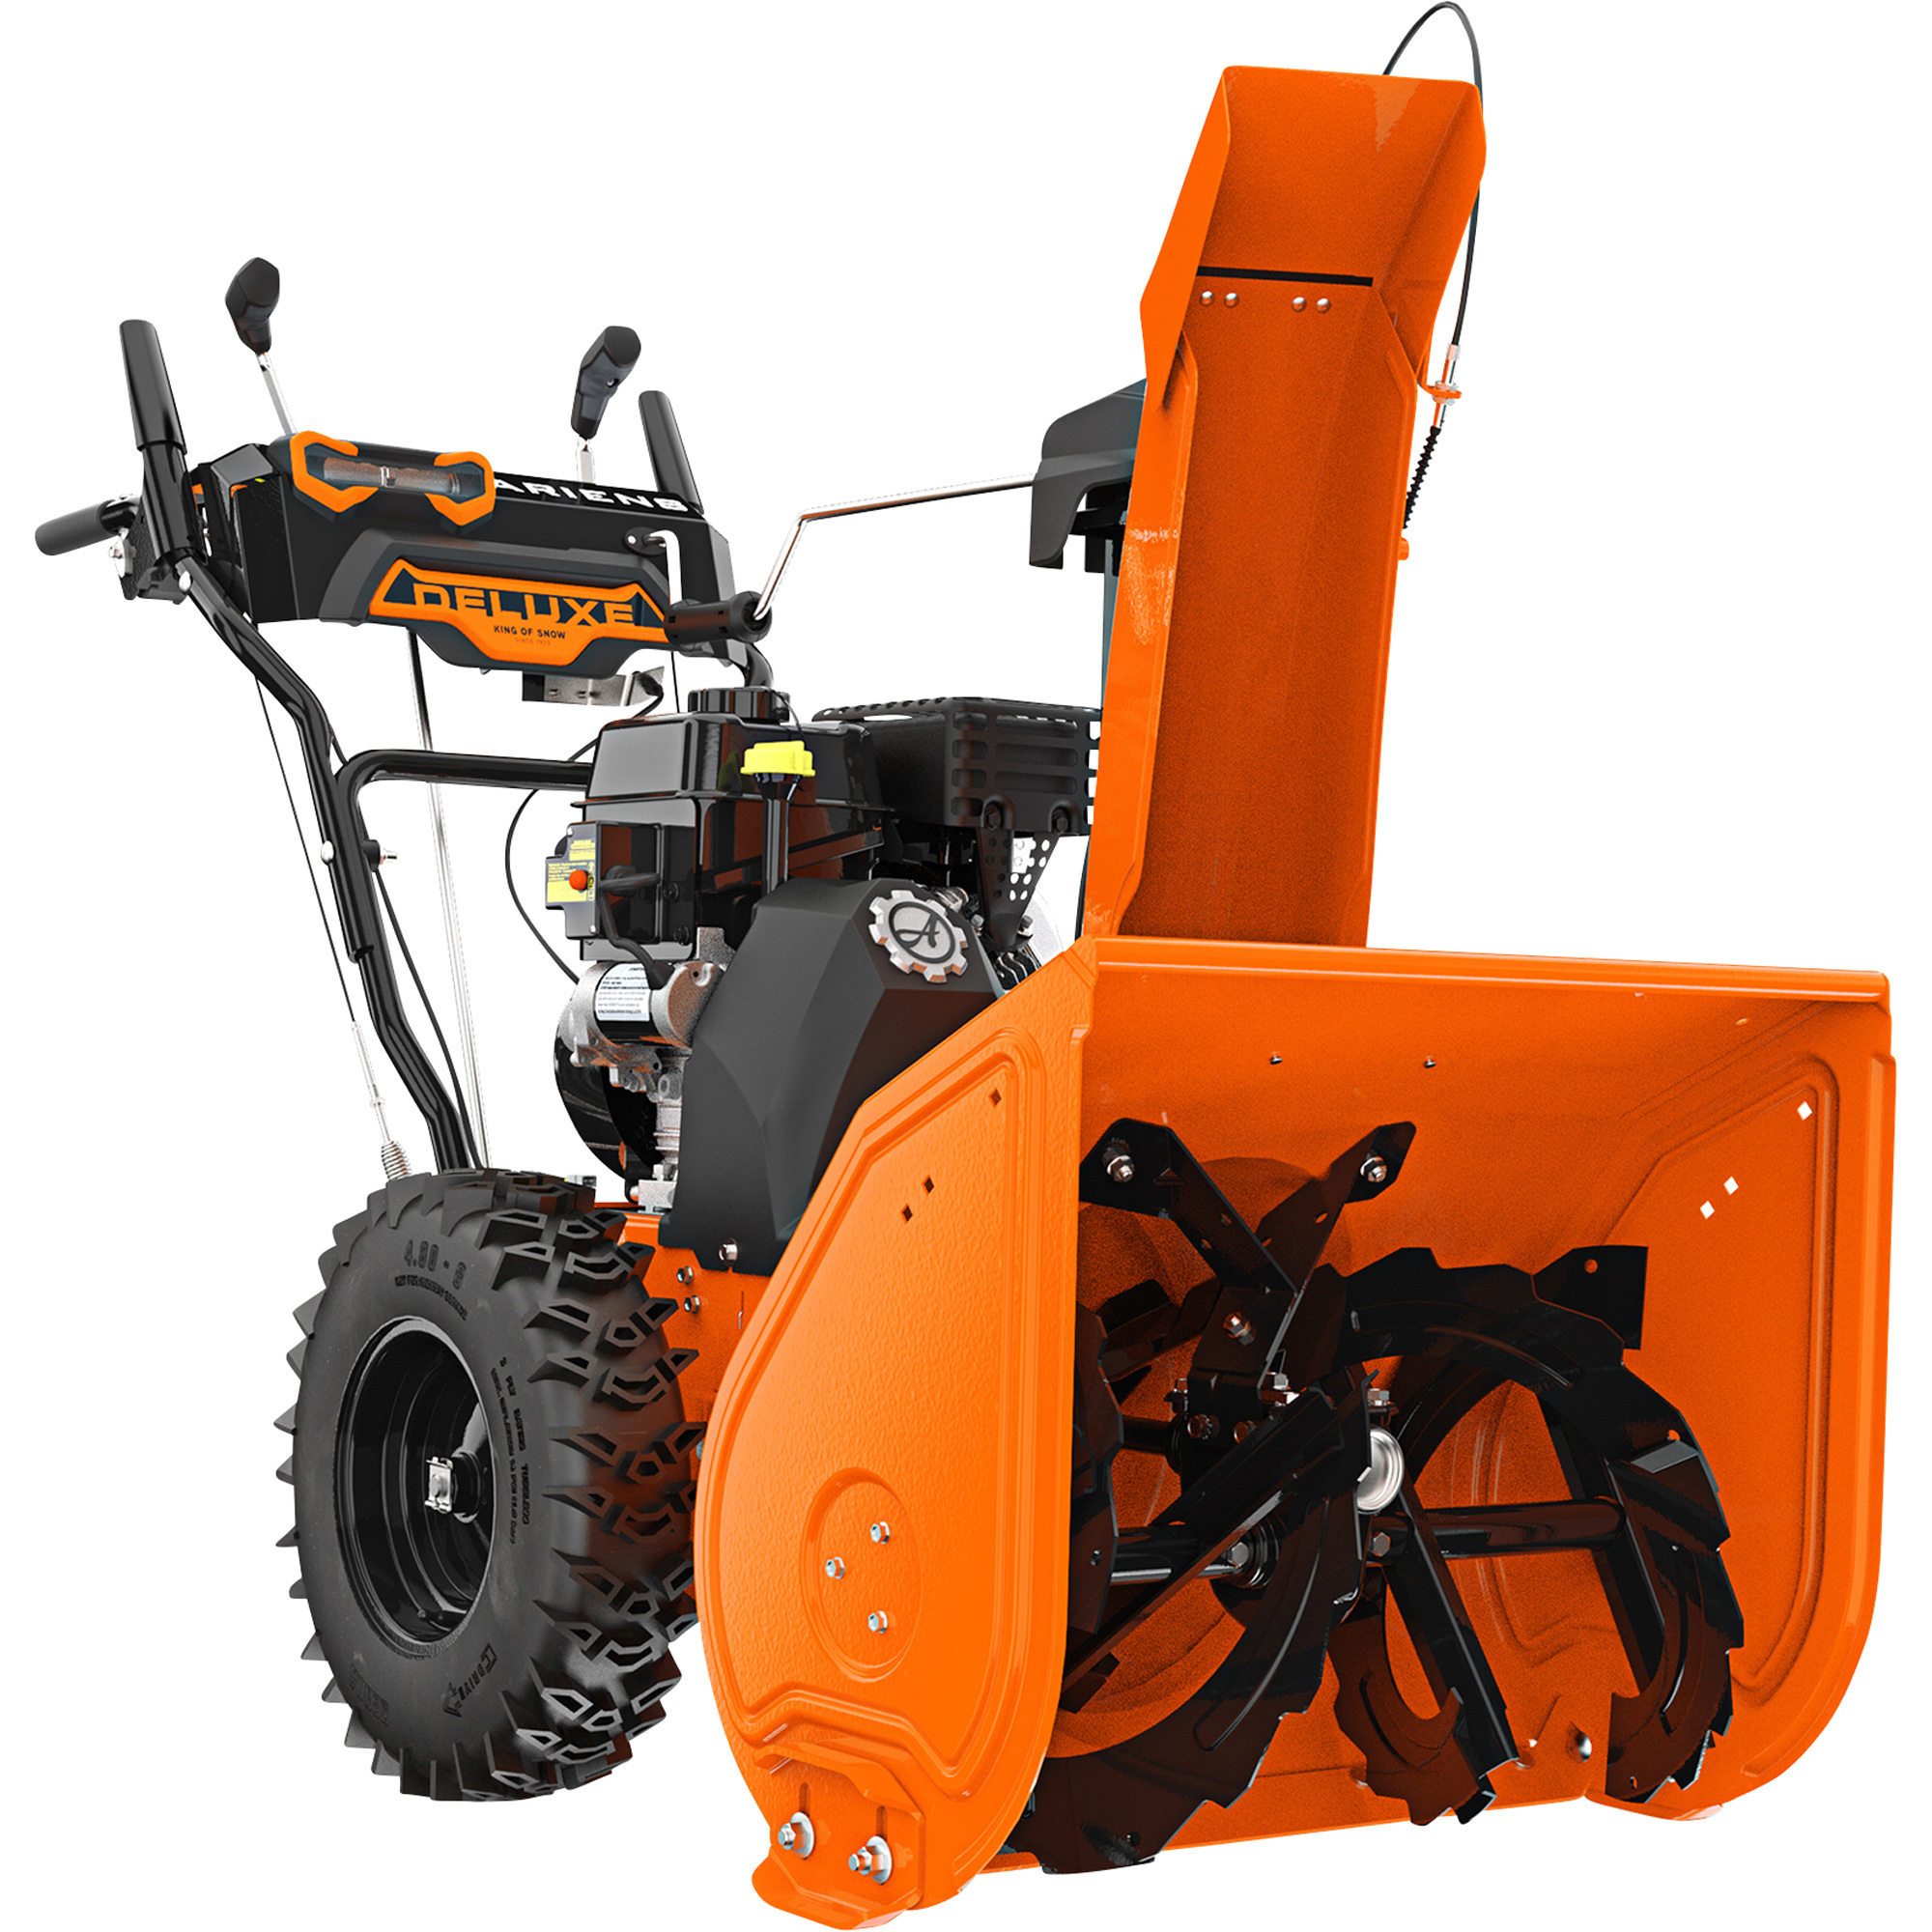 Ariens Deluxe 24 2-Stage Self-Propelled Snow Blower with Electric Start, 24Inch, 254cc, Model 921045